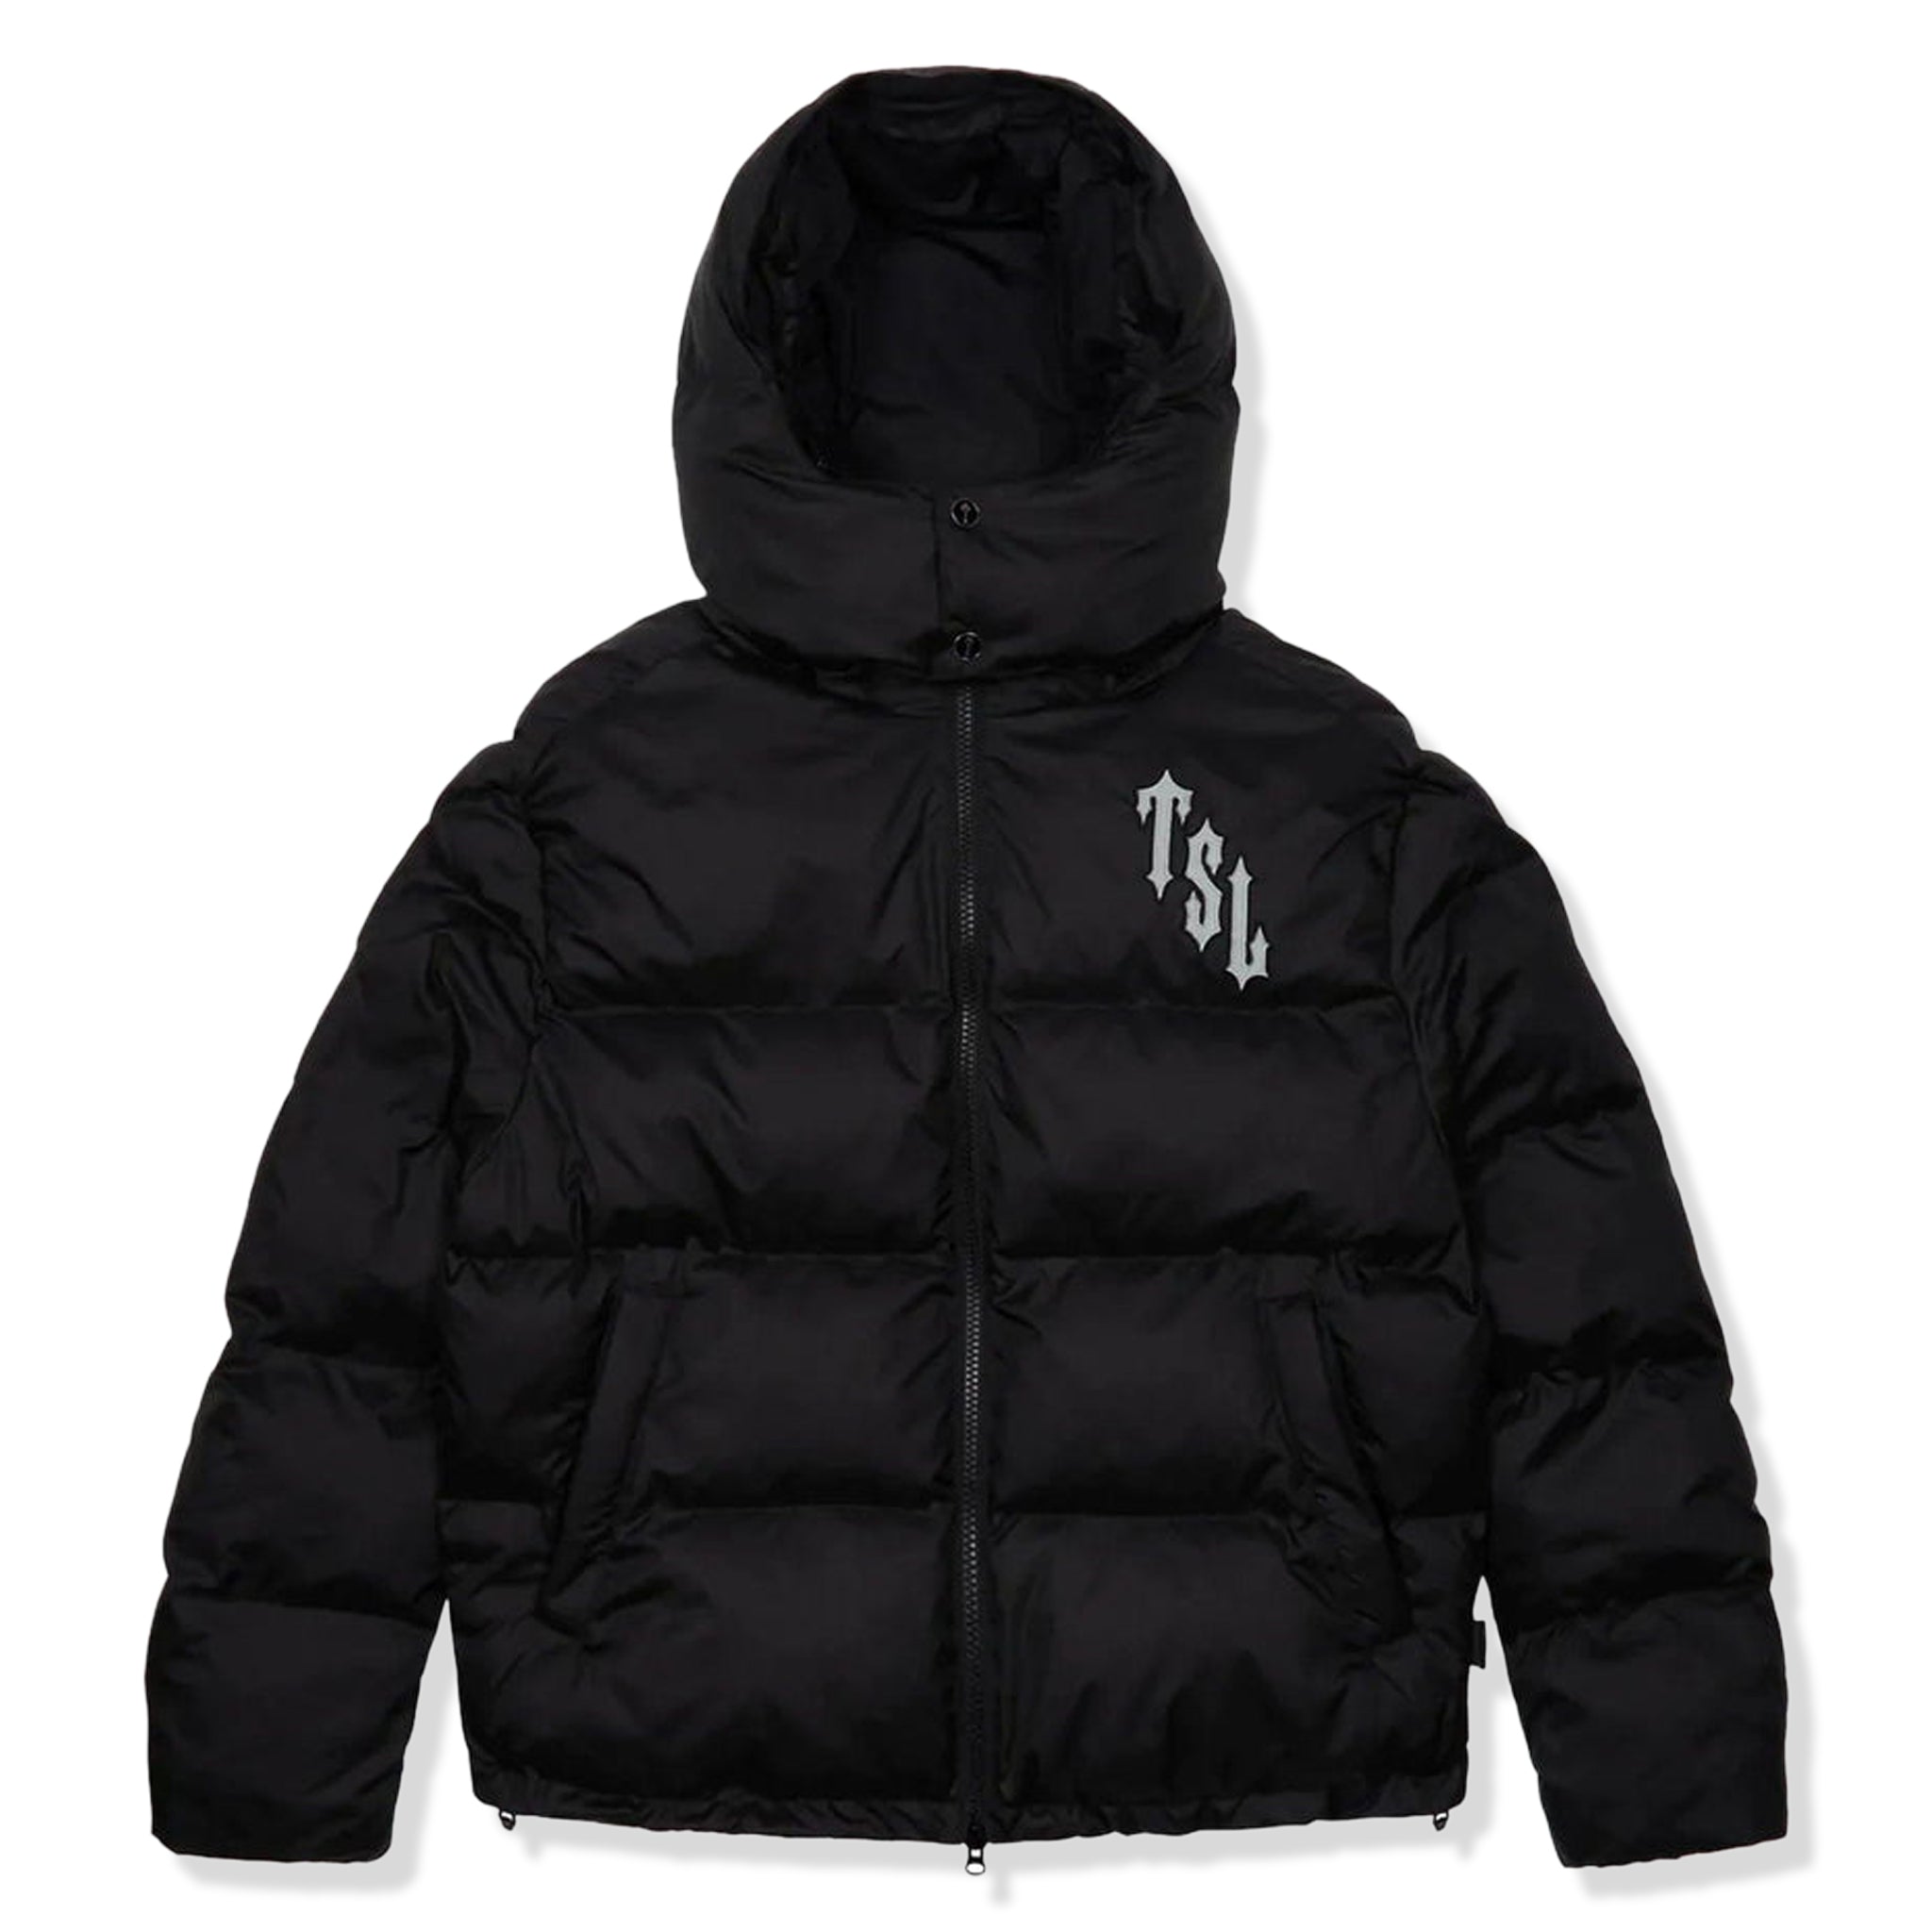 Trapstar Shooters Reflective Hooded Puffer Black Jacket